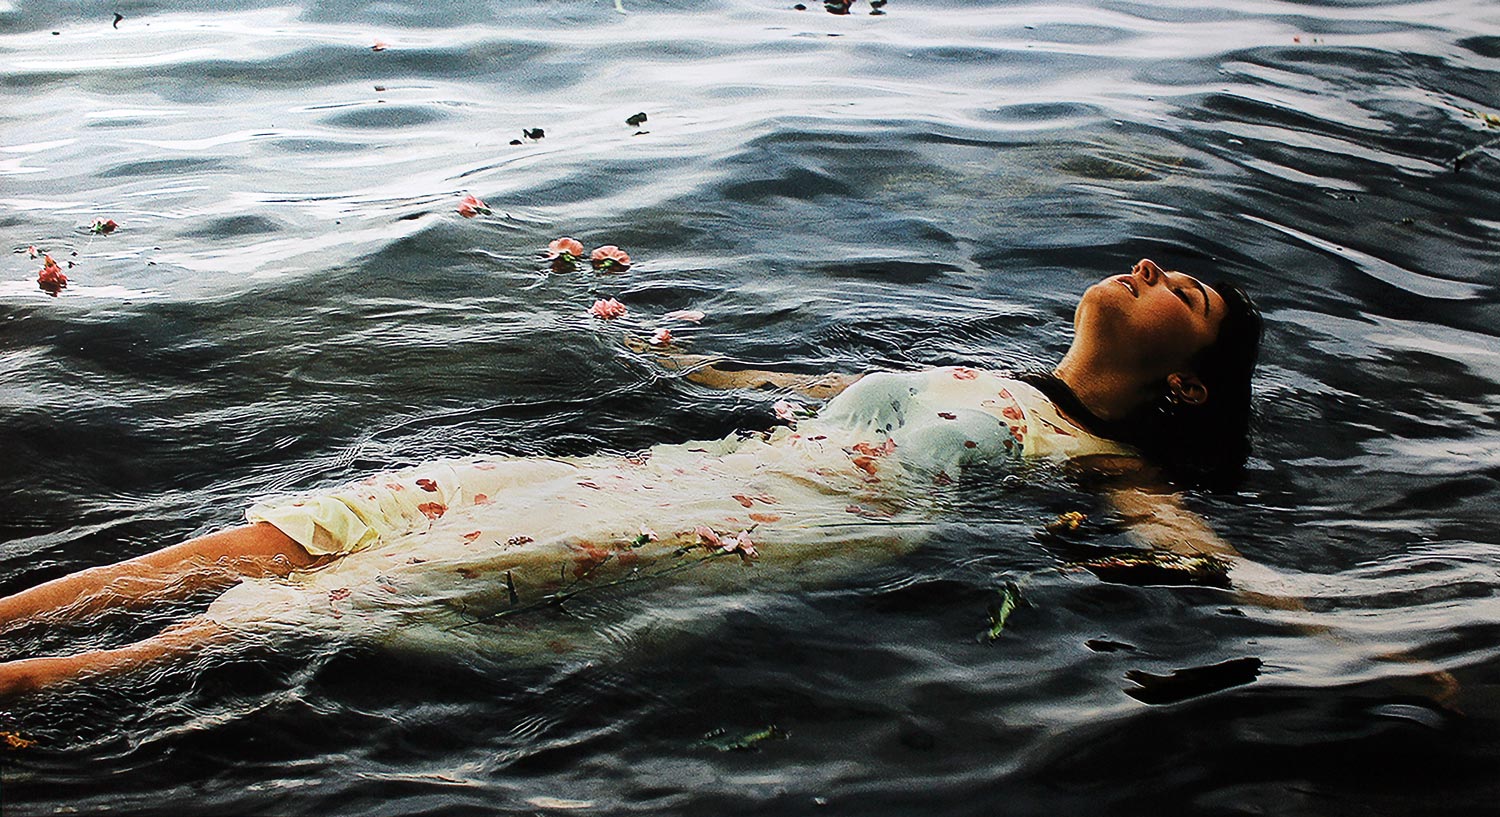 Student artwork of a girl floating in water